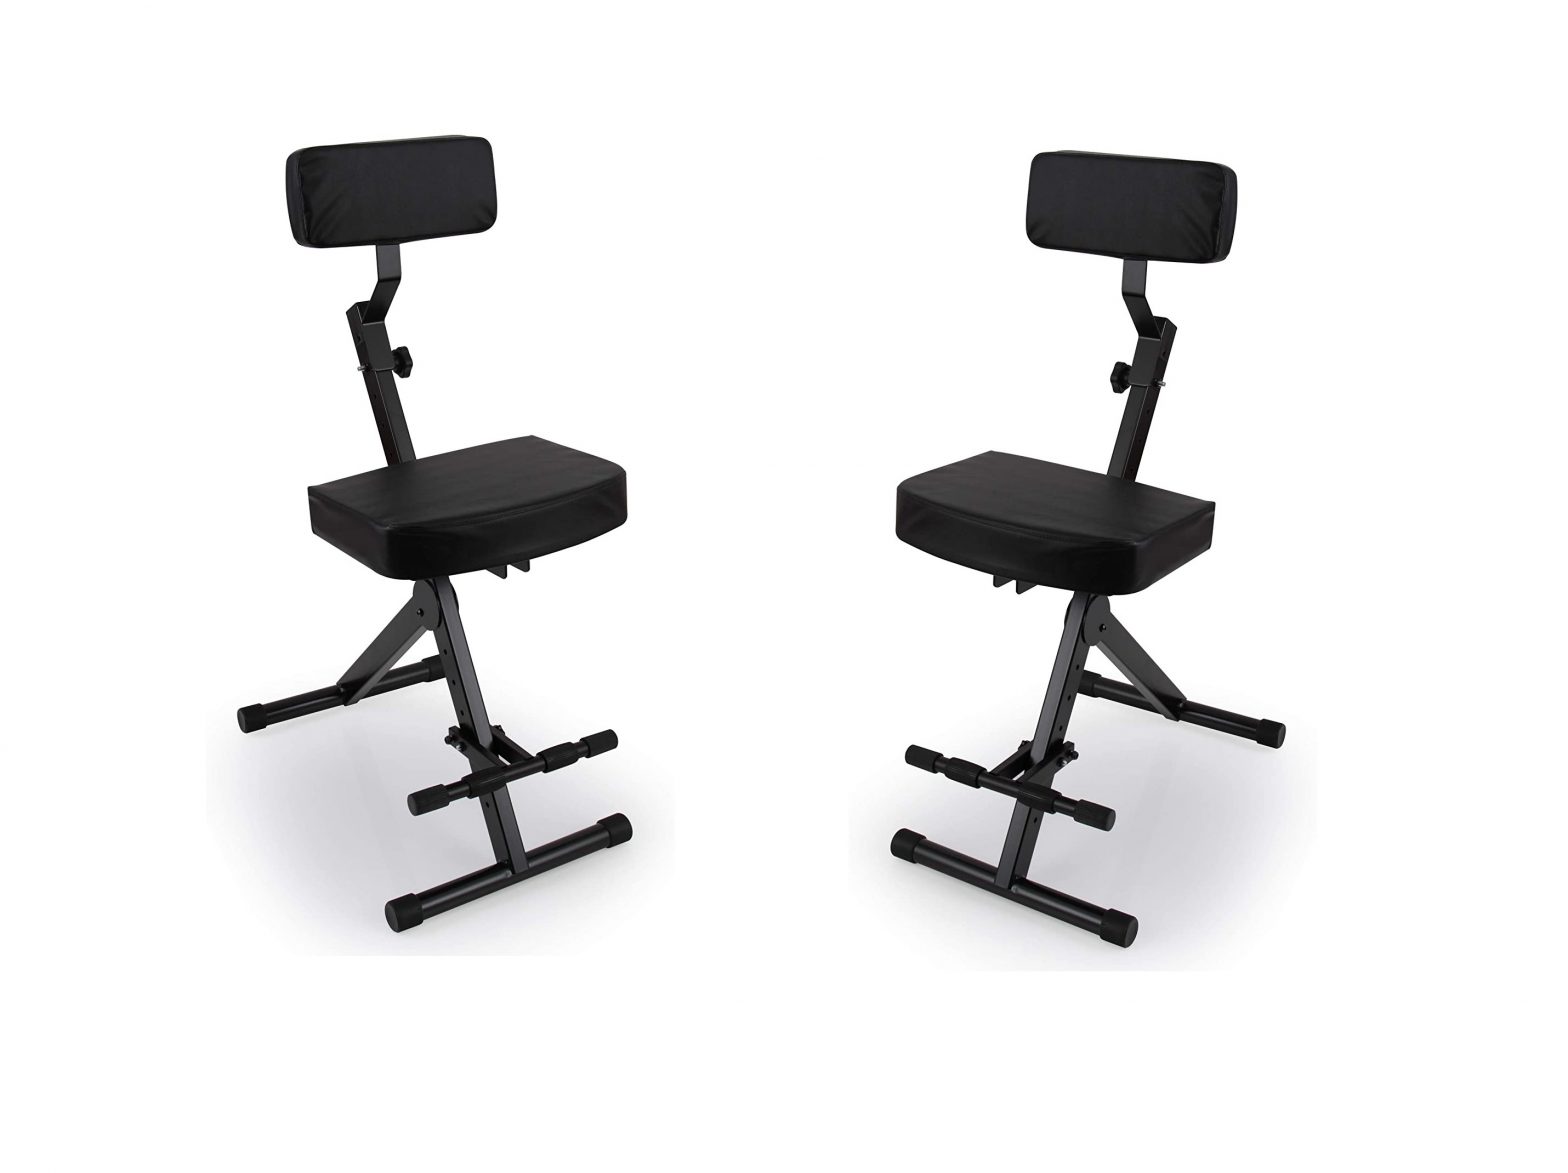 PYLE Musician and Performer Chair Seat Stool User Manual